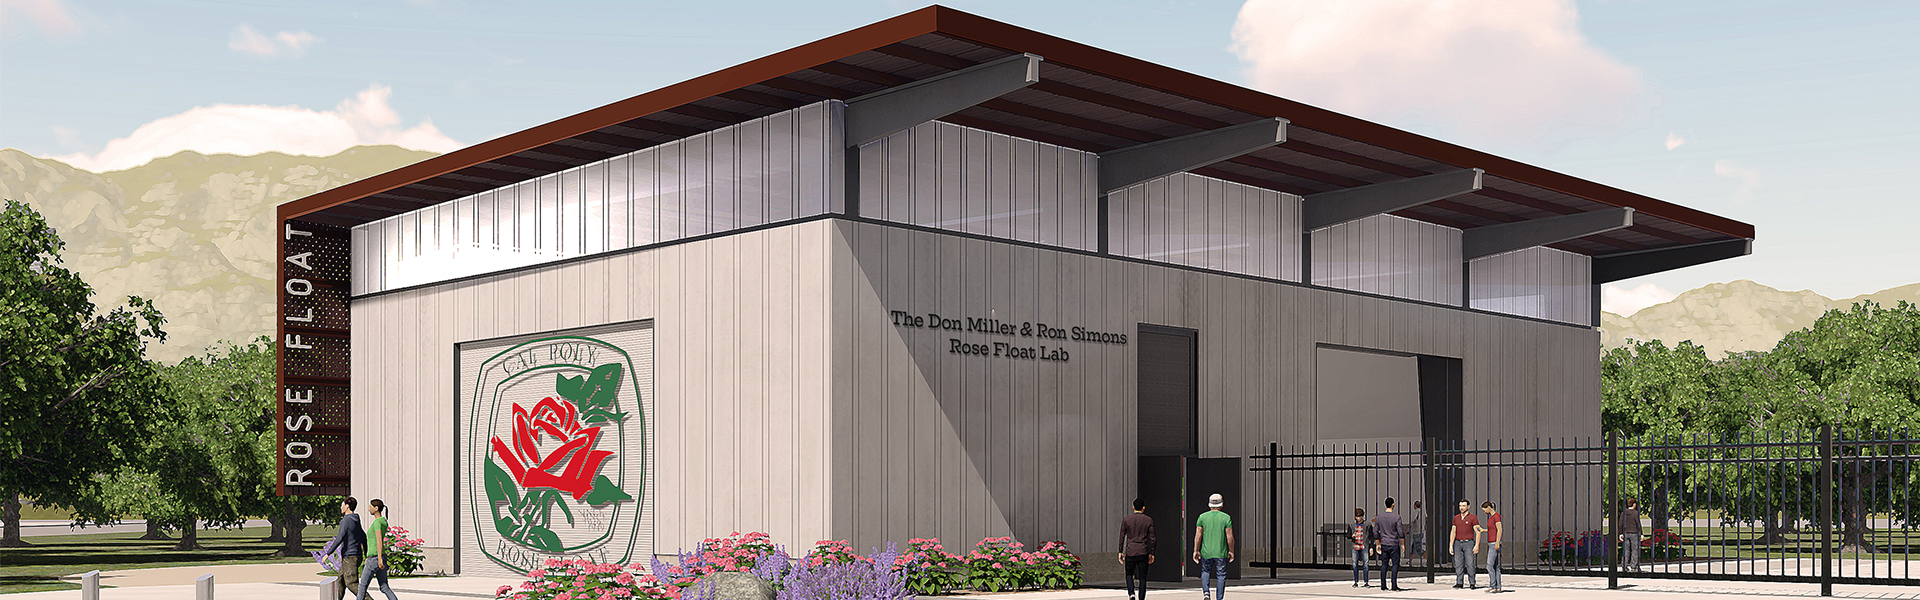 Rendering of the Rose Float Lab